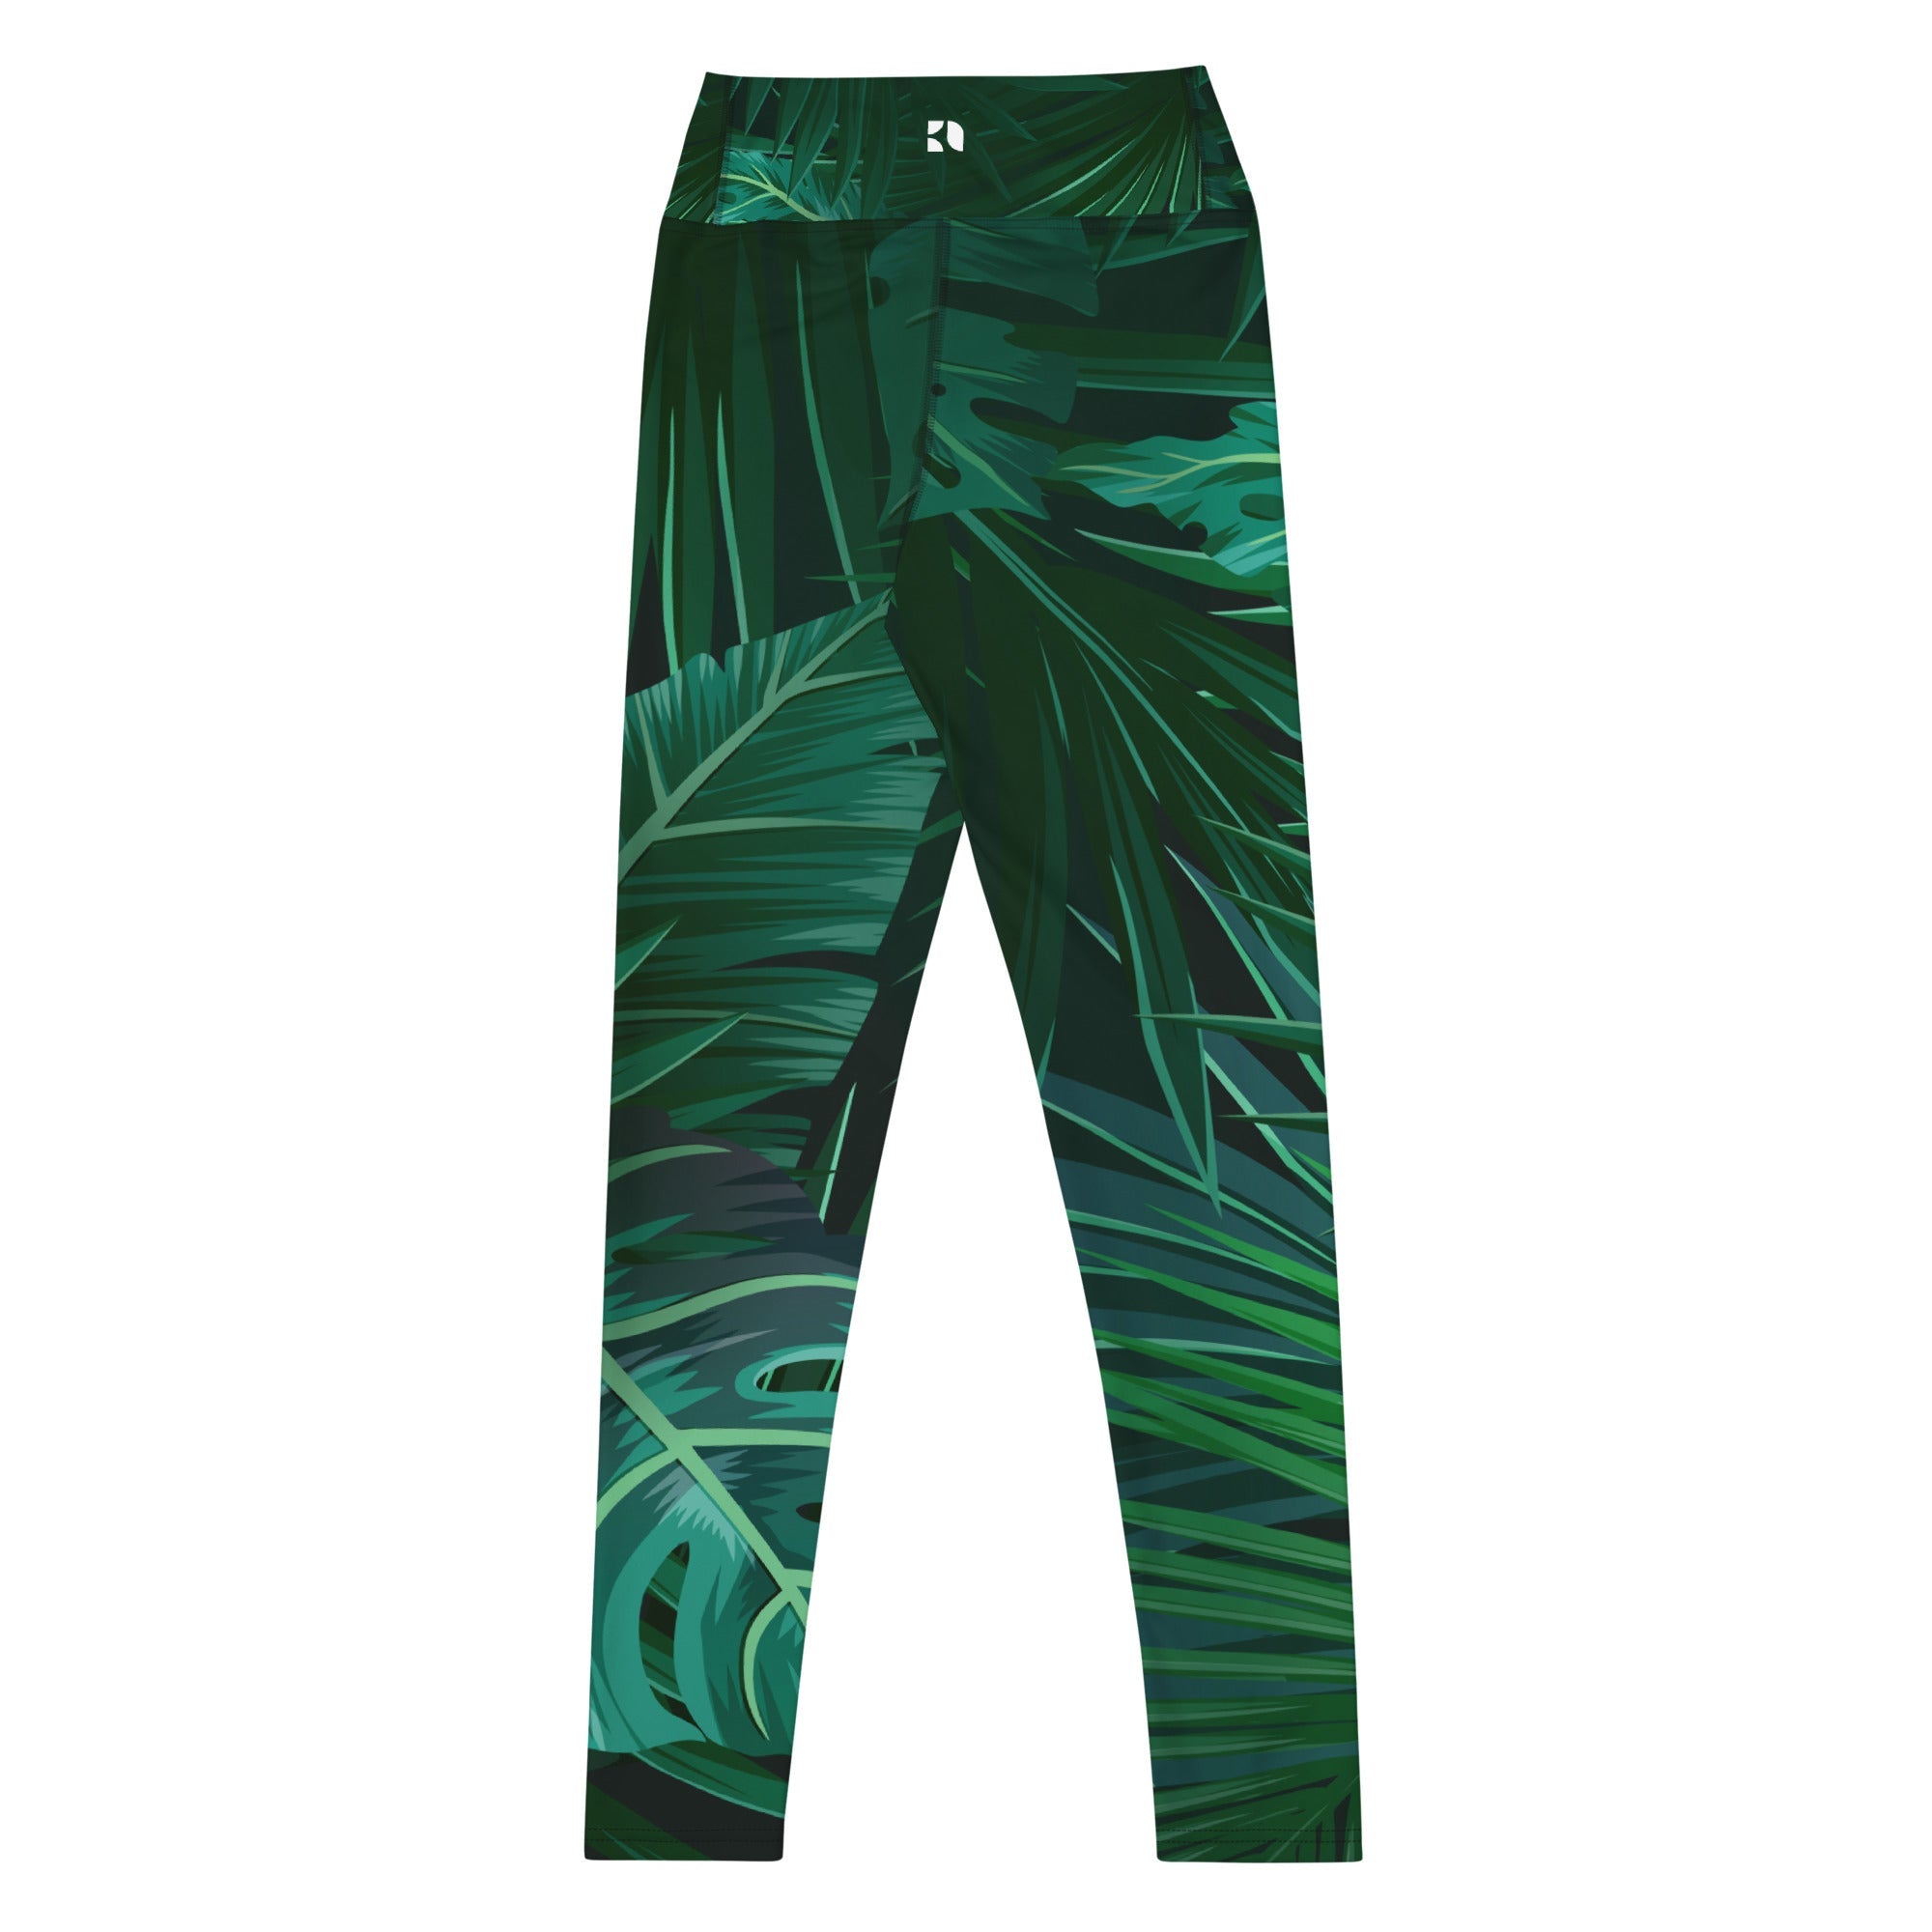 High Waisted Leggings for Women Tropical Palm Leaf Jungle Workout